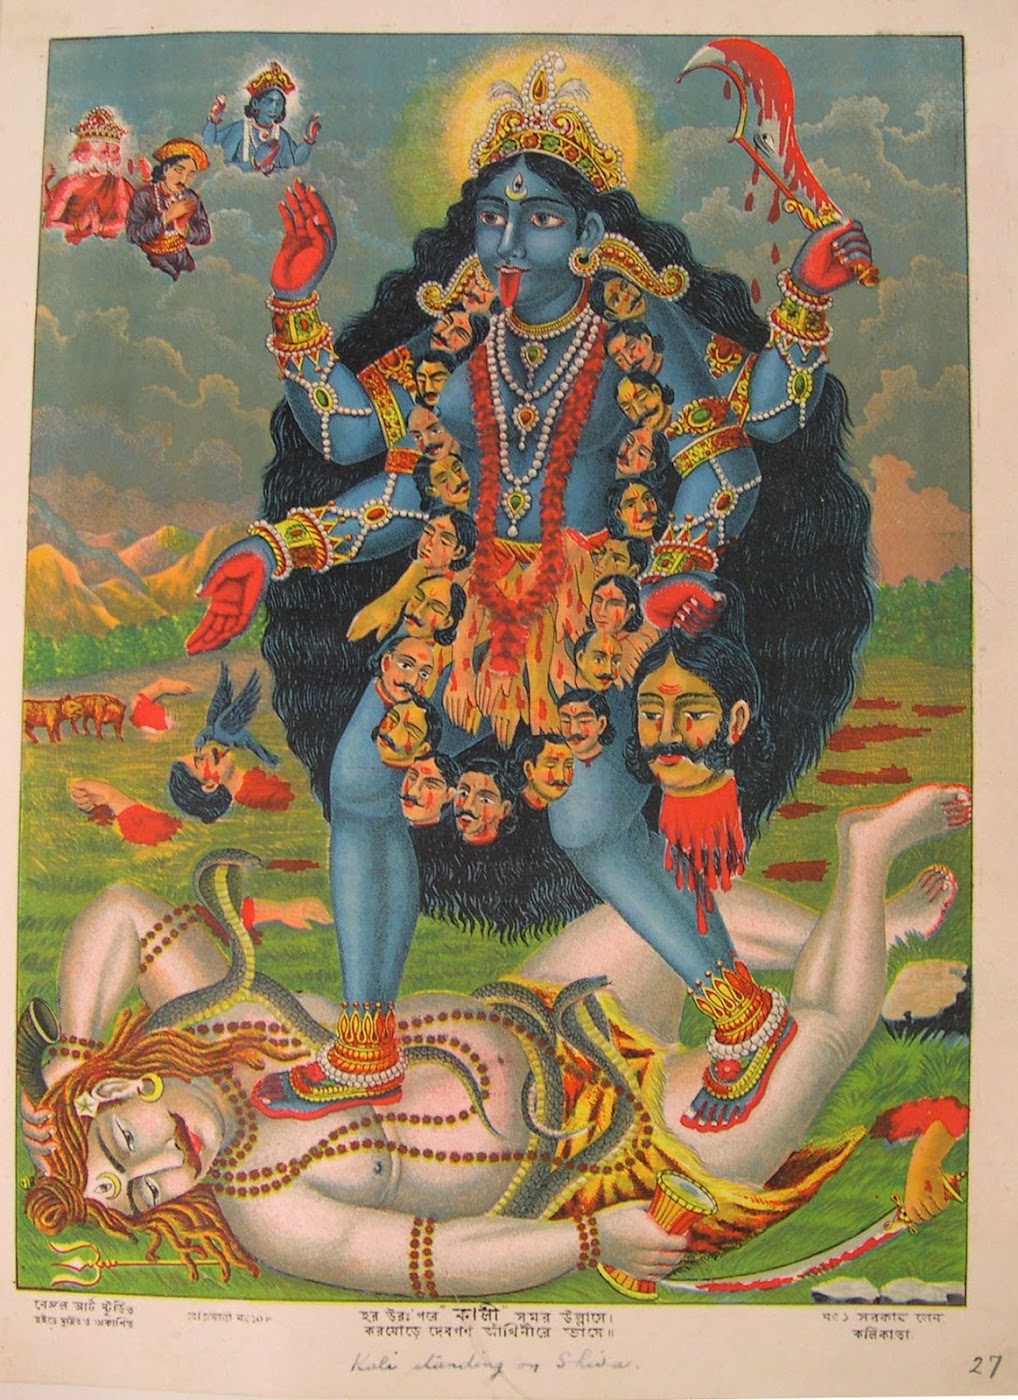 Kali, Draped with a Necklace of Skulls, Stands on Shiva - Lithograph Print, Bengal Art Studio, Circa 1895